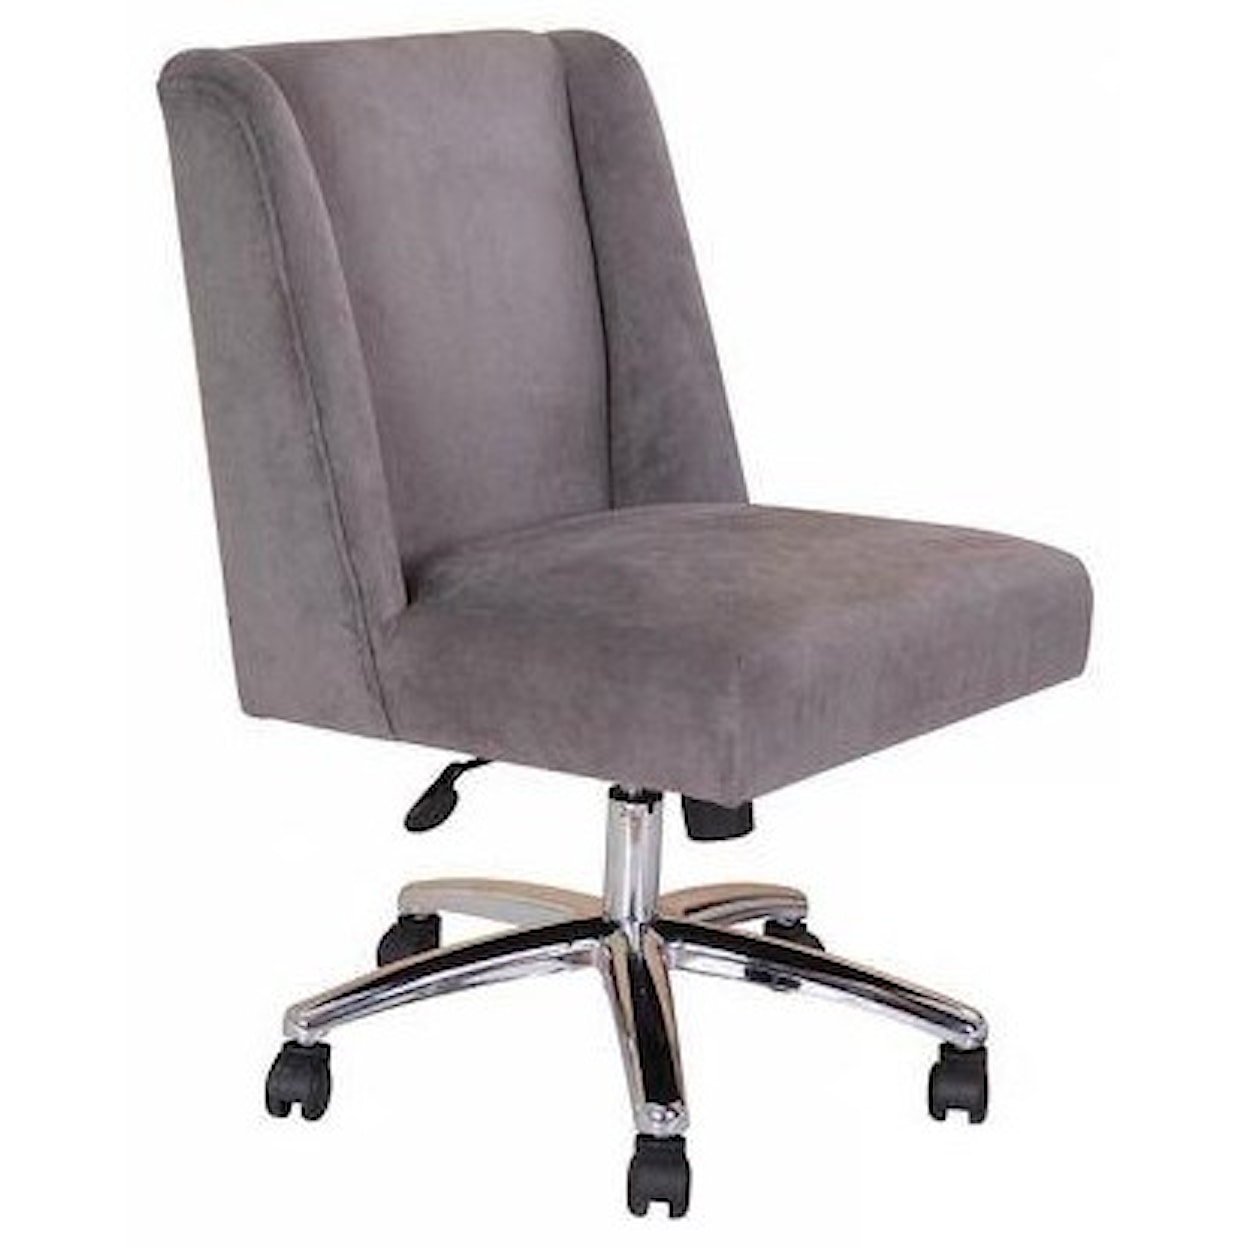 Presidential Seating Decorative Task Chair